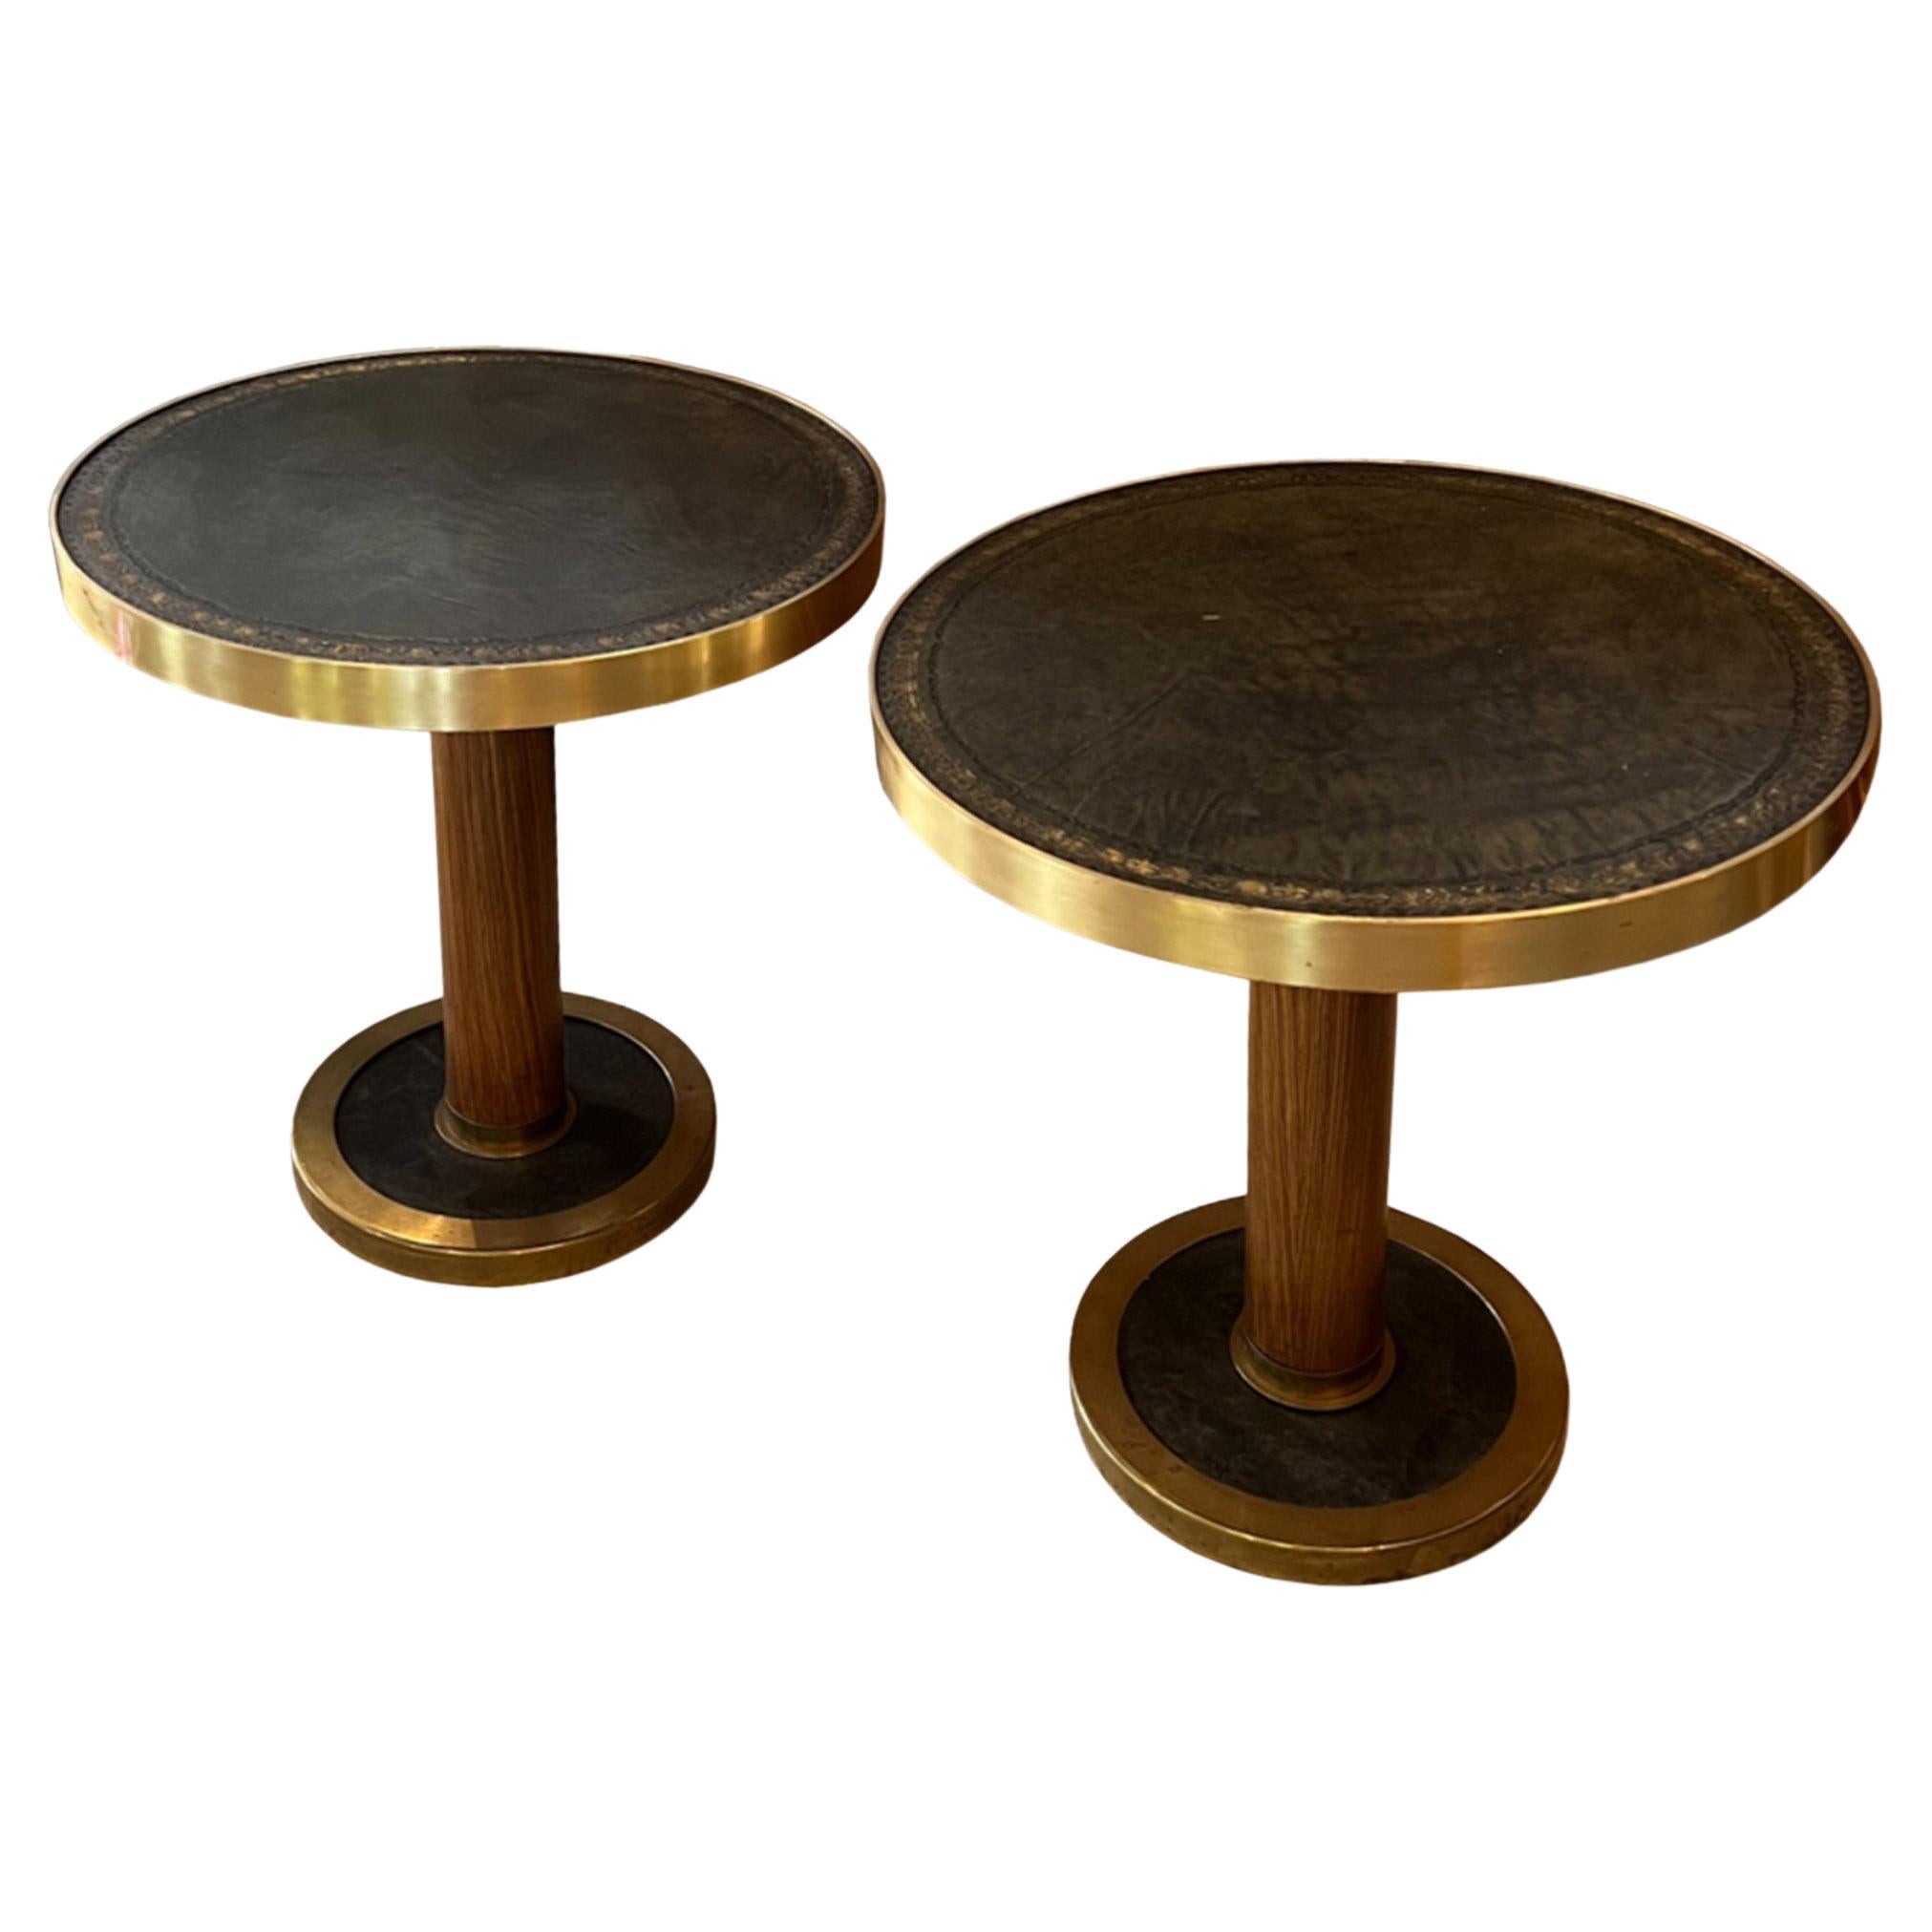 Pair of British 1970s Brass Mounted, Leather Topped Ship's Tables